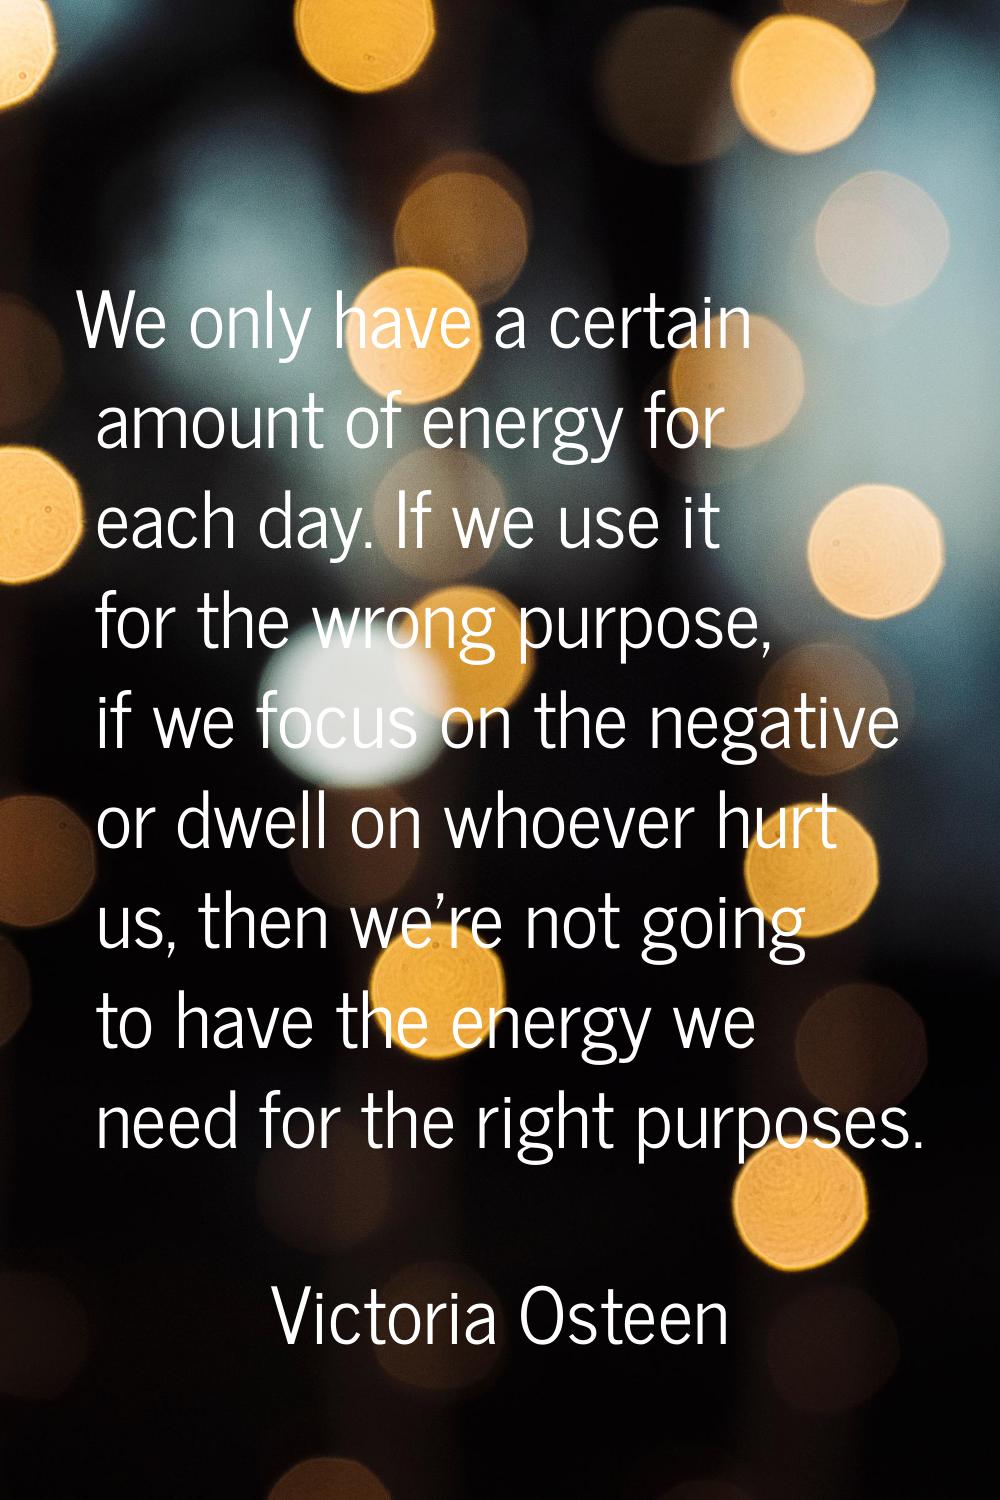 We only have a certain amount of energy for each day. If we use it for the wrong purpose, if we foc